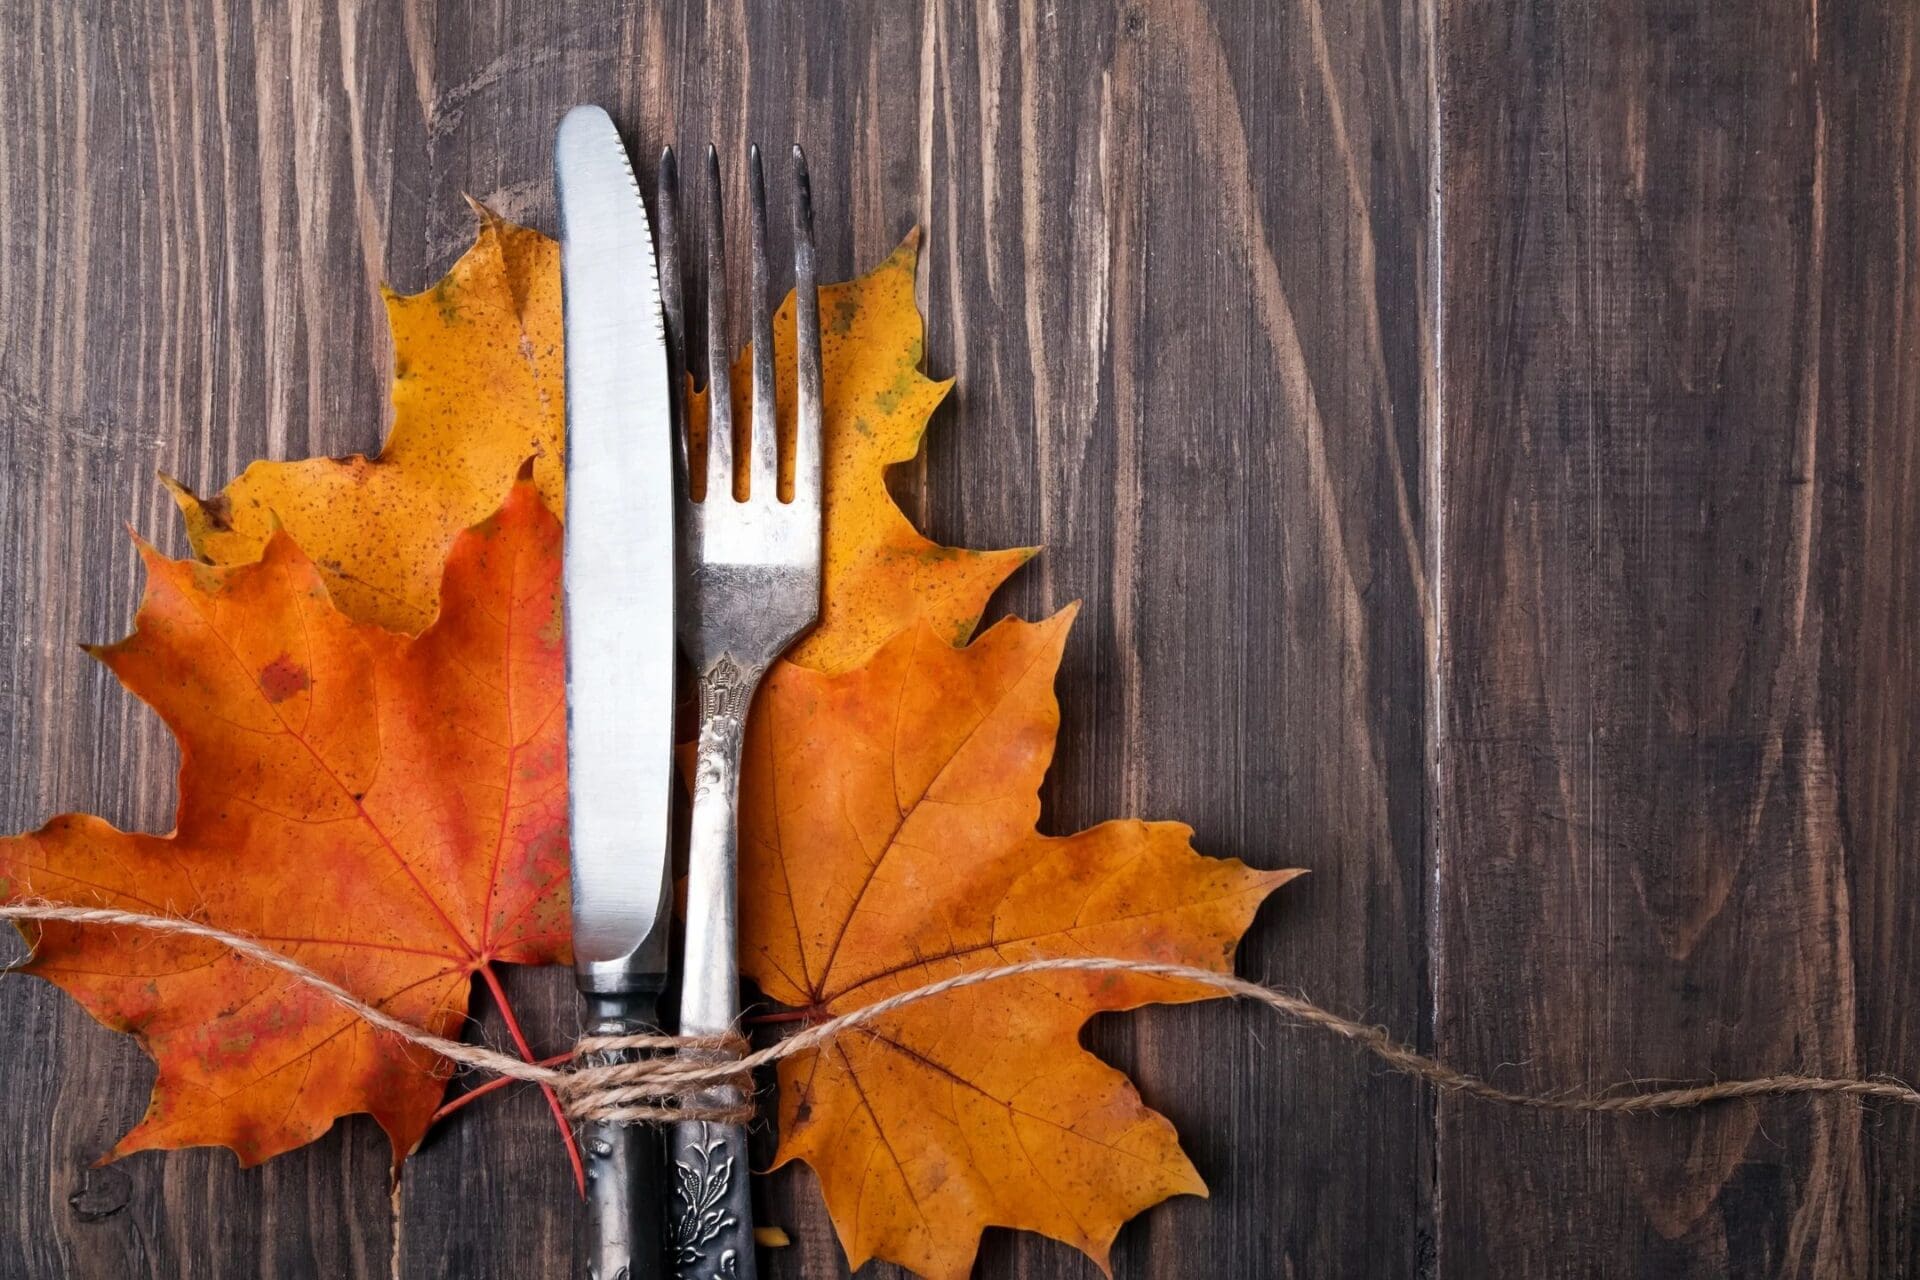 A fork, knife and autumn leaves on a wooden table.